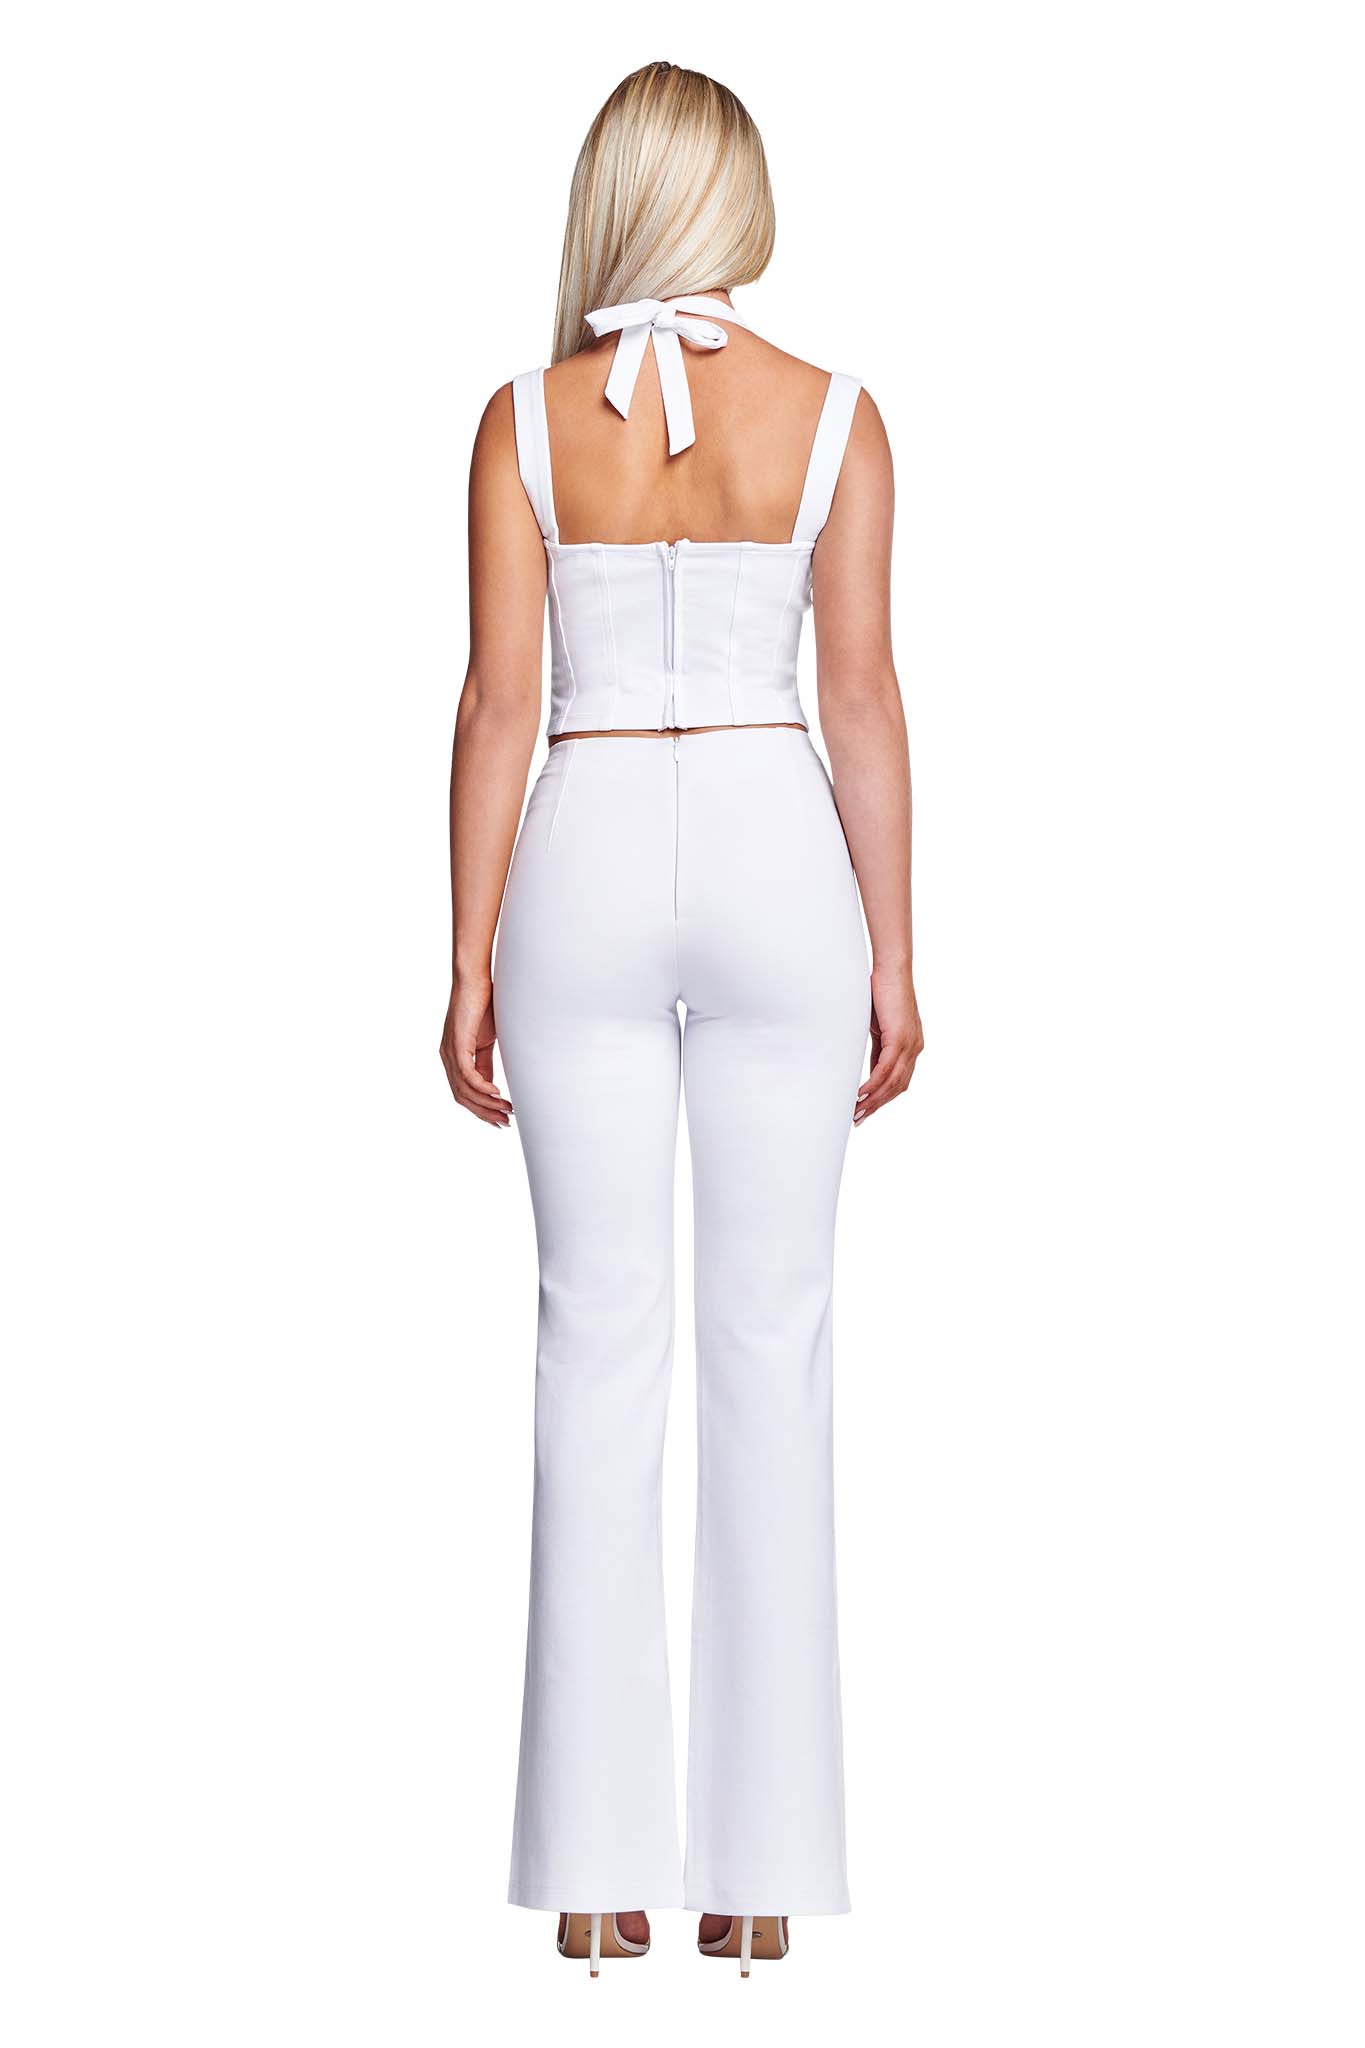 CARRIE PANT - WHITE